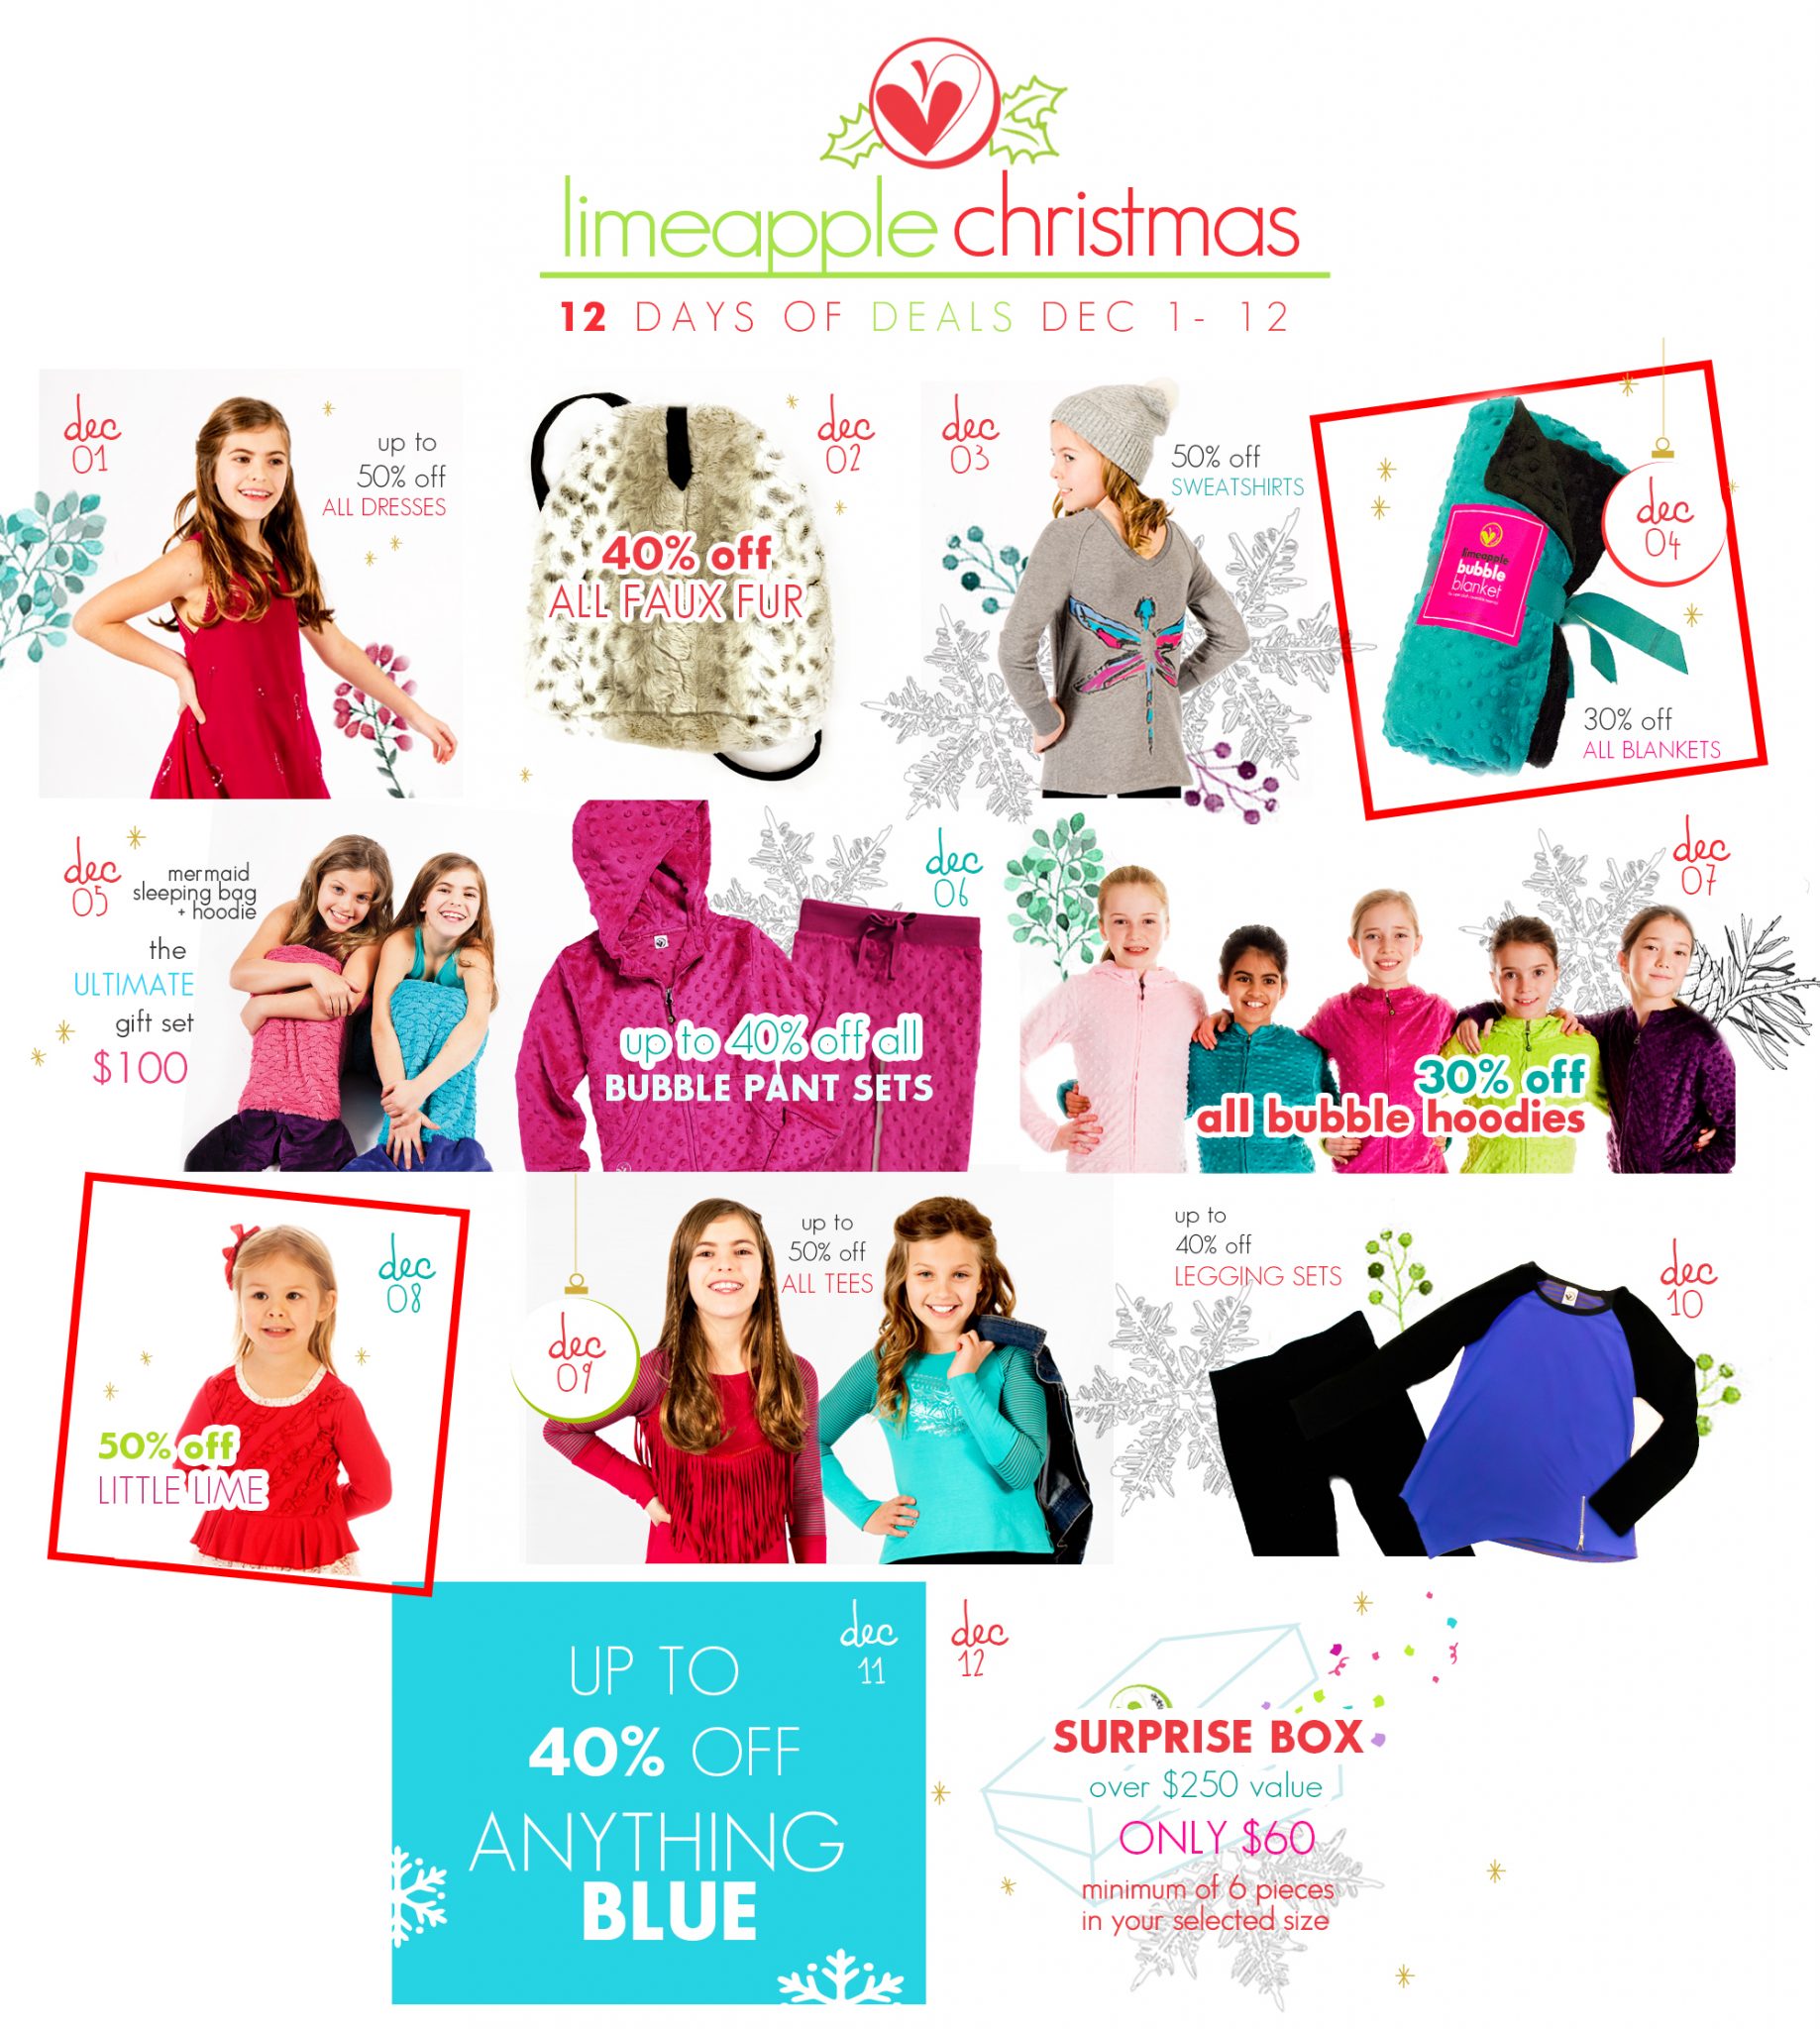 limeapple-christmas-12-days-of-deals